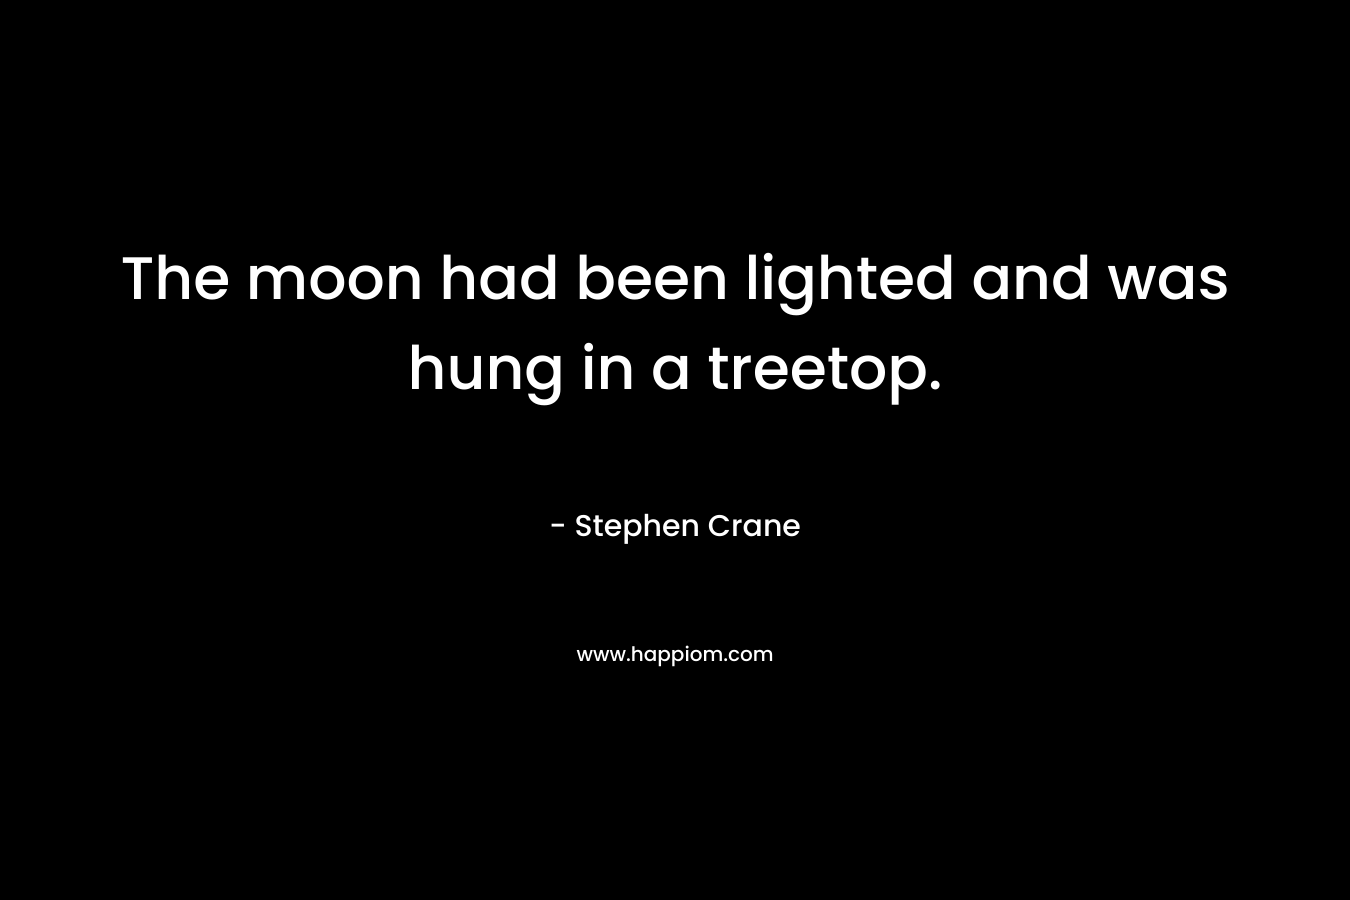 The moon had been lighted and was hung in a treetop. – Stephen Crane